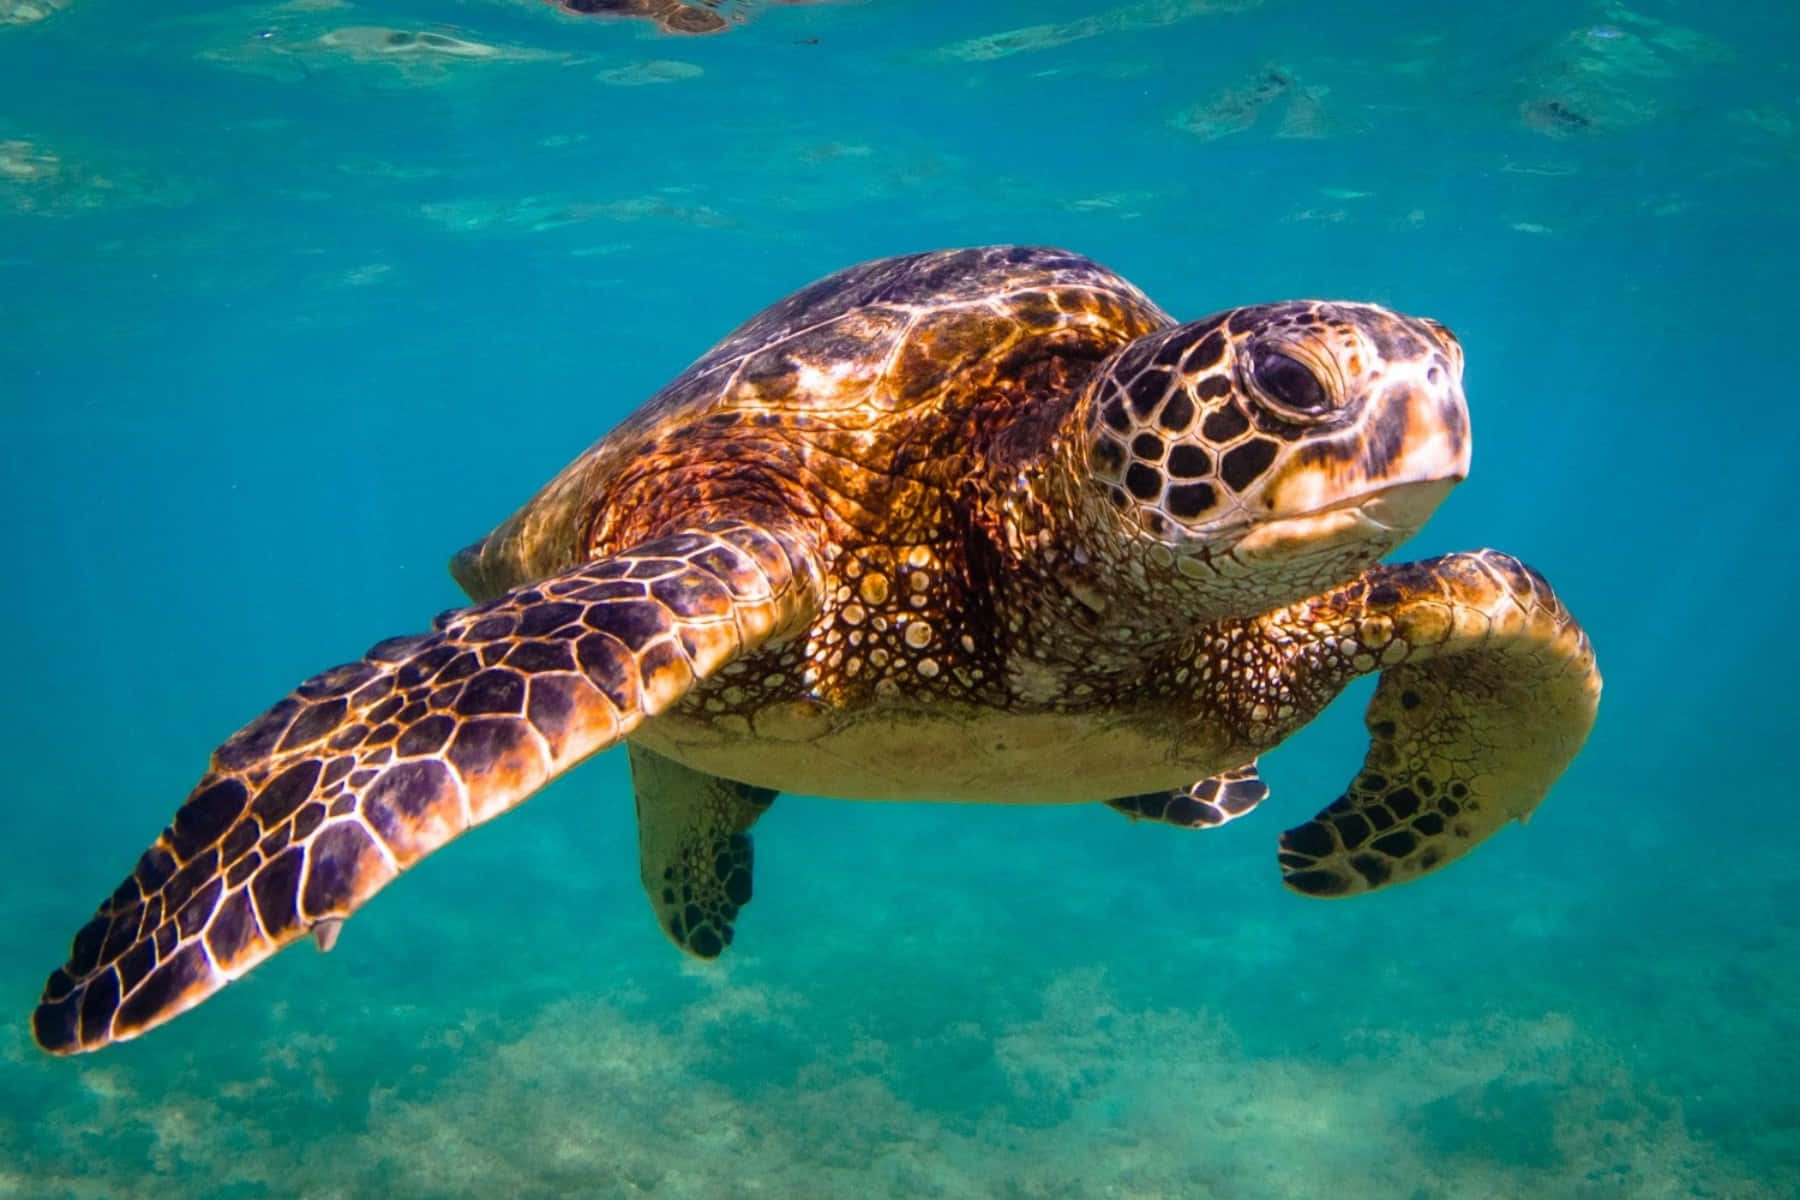 Photo  "A magnificent sea turtle swimming freely in the open ocean"